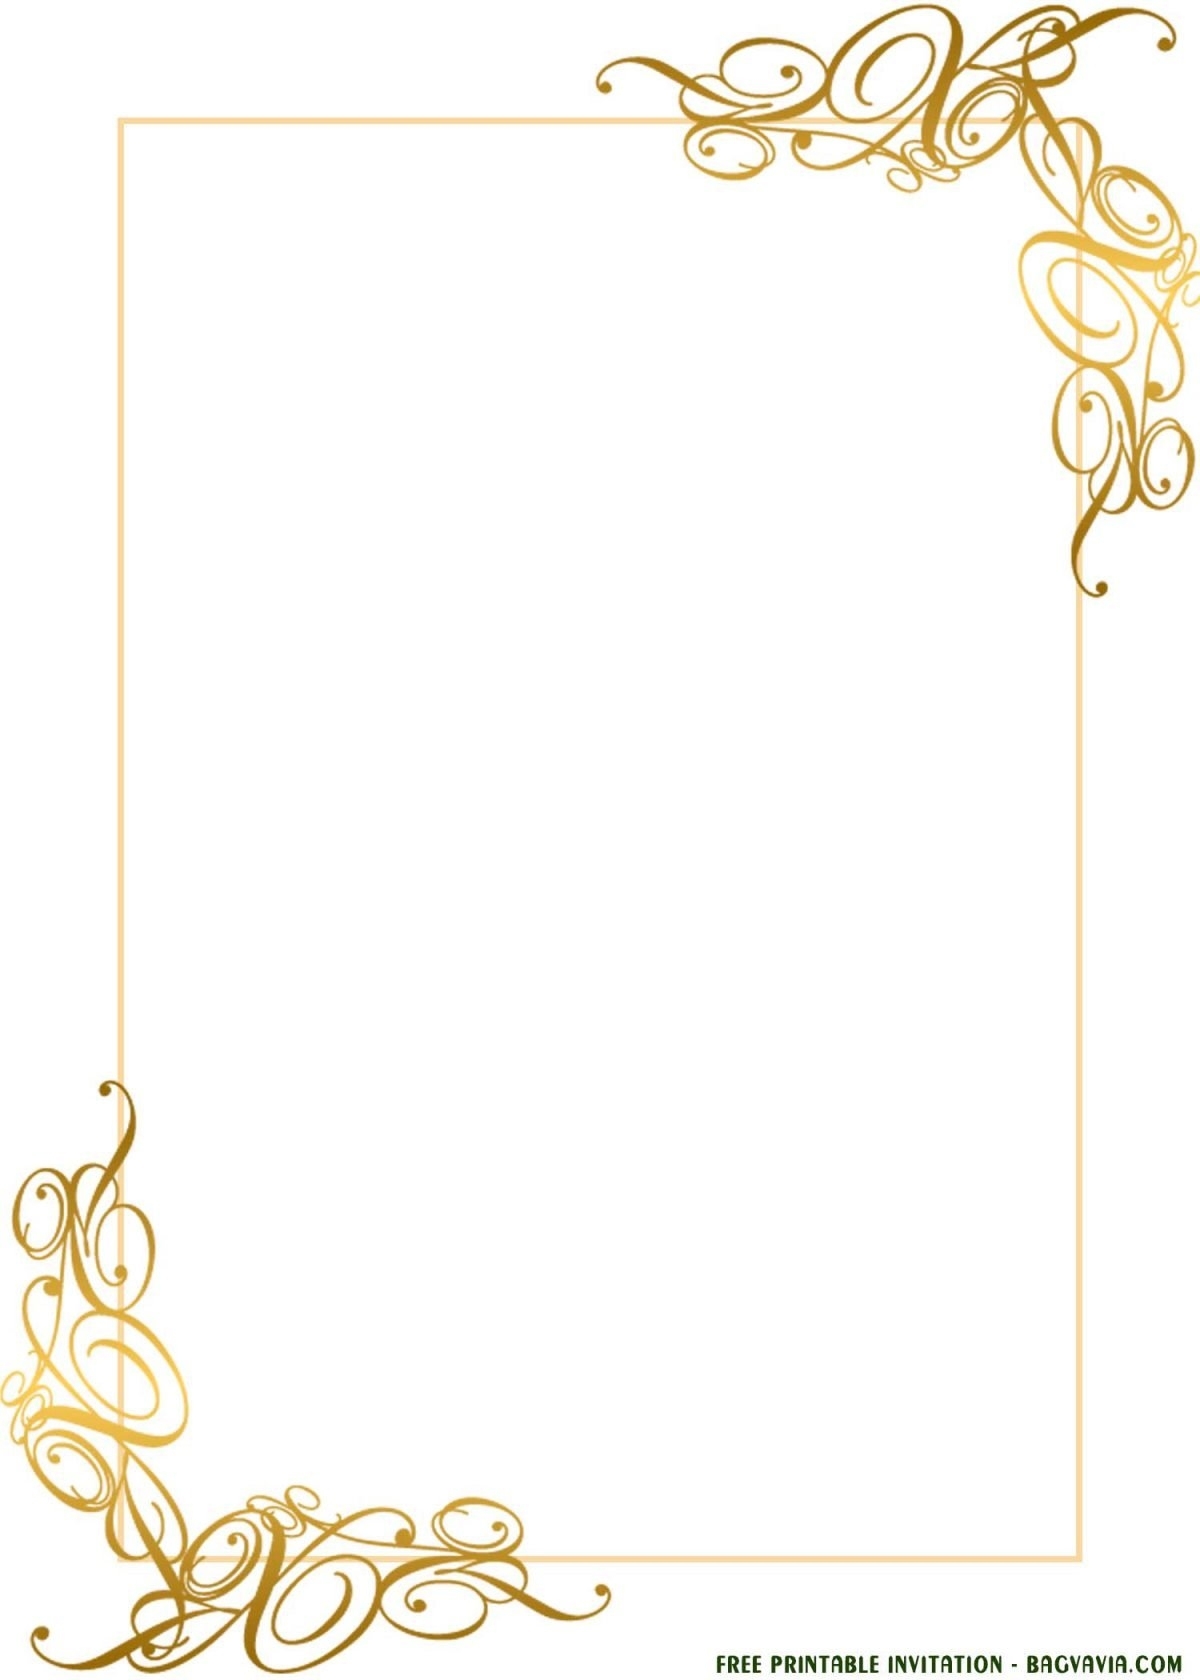 (Free Printable) - Gold Lace Invitation Templates For Any Occasions Regarding Blank Templates For Invitations